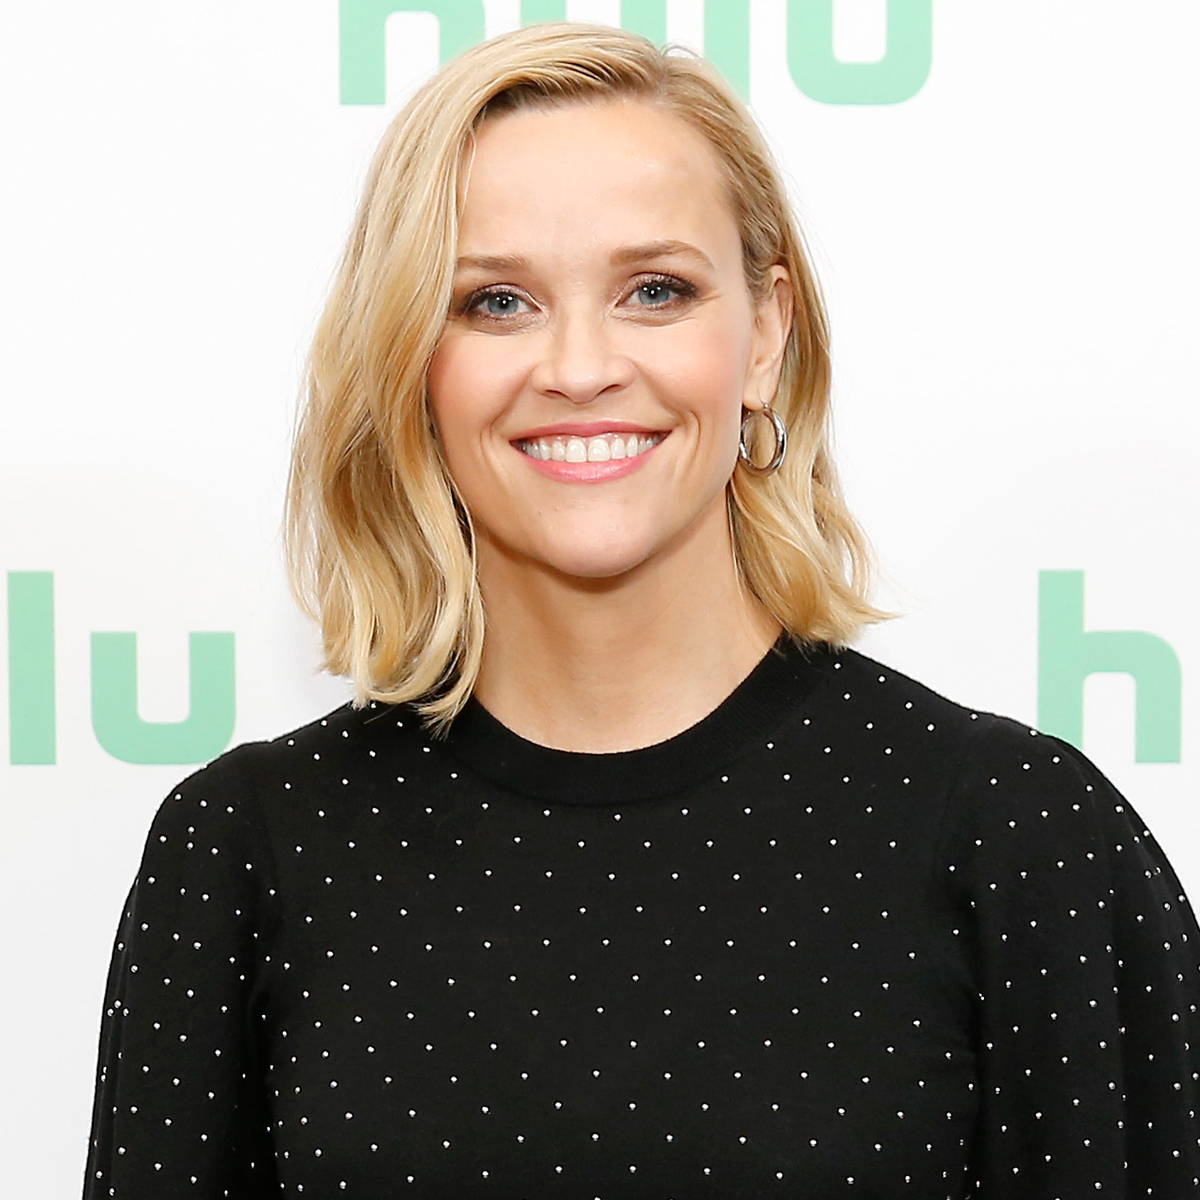 Why Women Everywhere Love Reese Witherspoon's Draper James